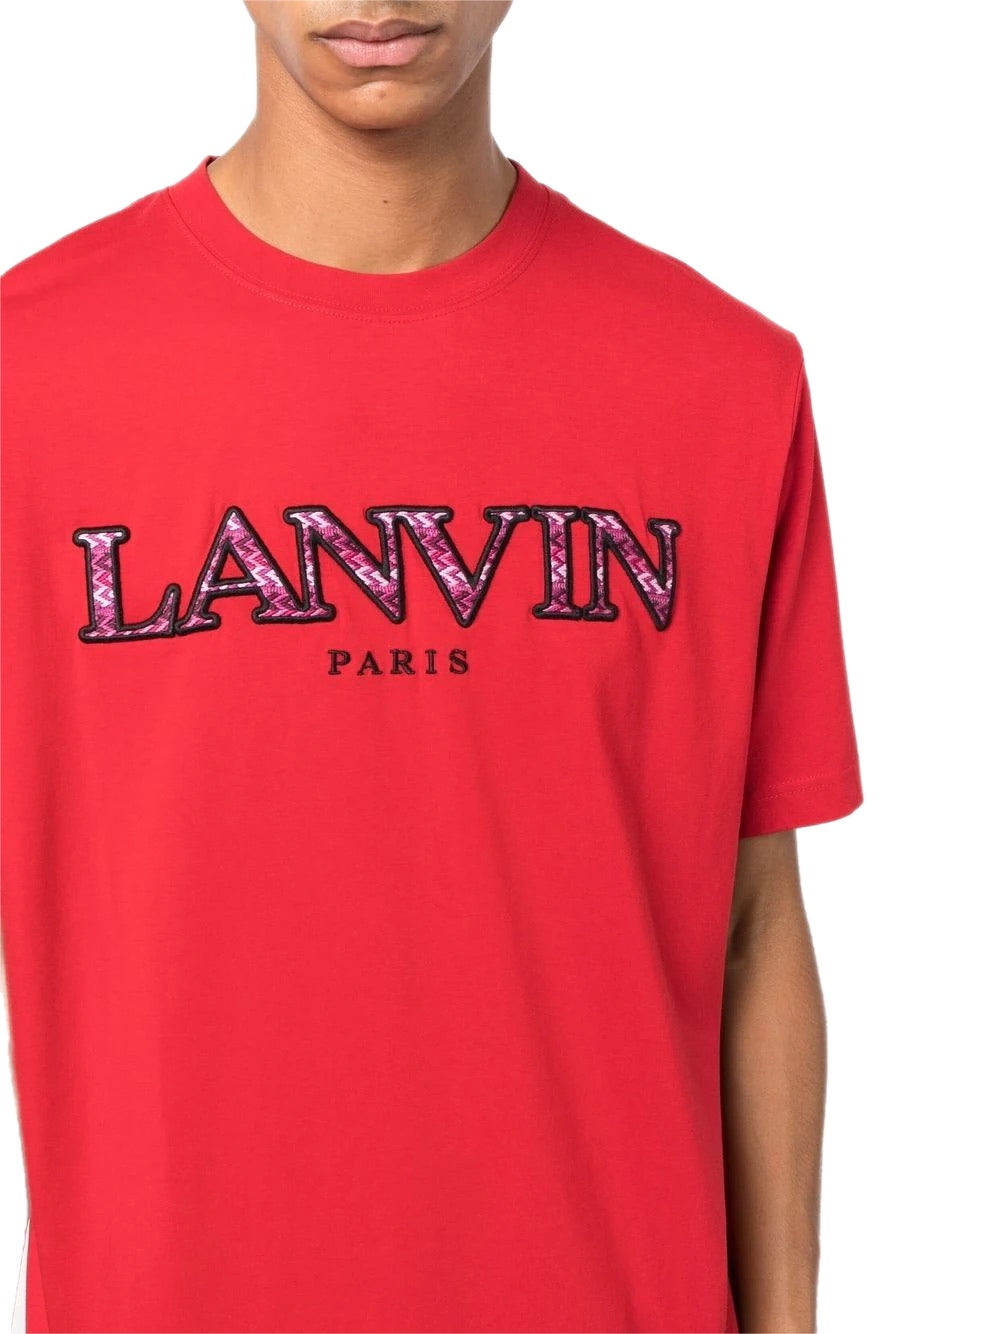 Lanvin logo-embroidered T-shirt